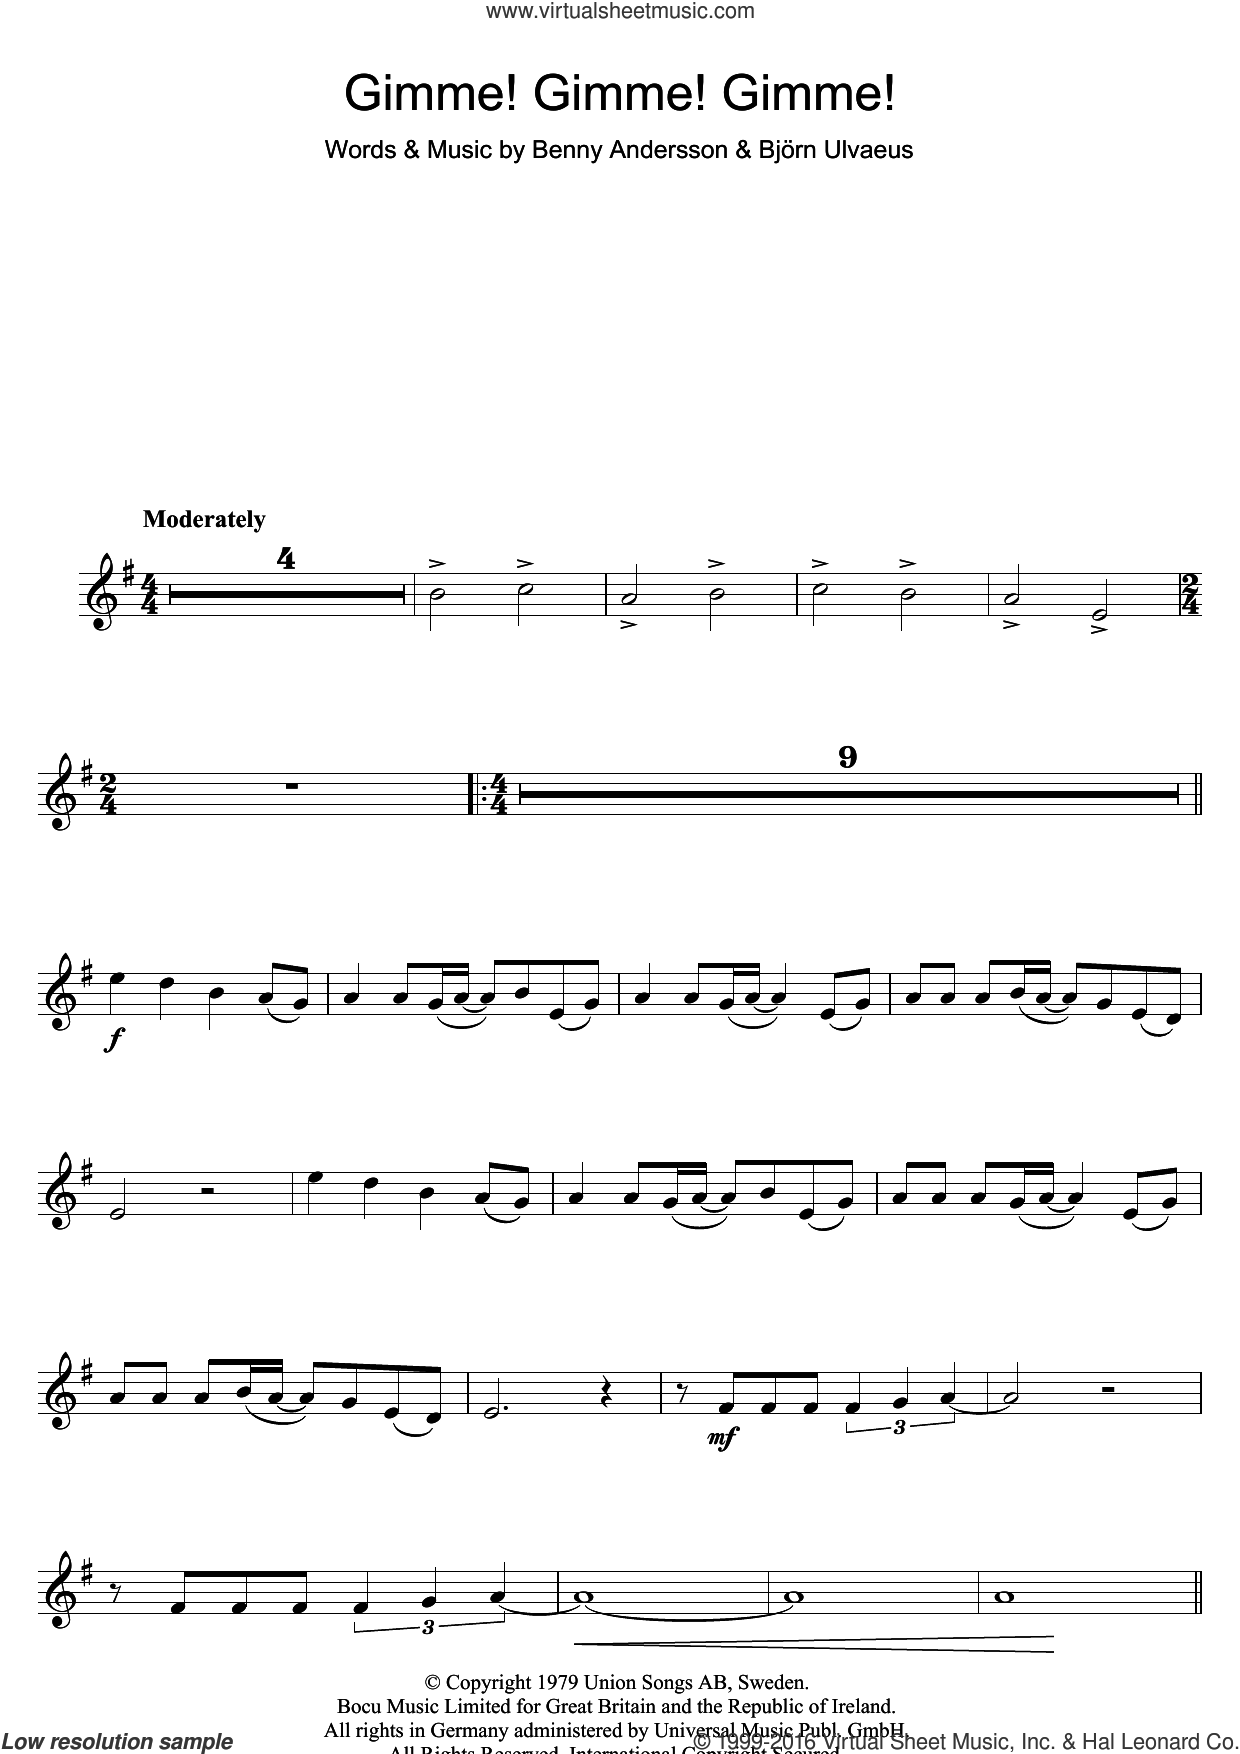 Abba Gimme Gimme Gimme A Man After Midnight Sheet Music For Clarinet Solo